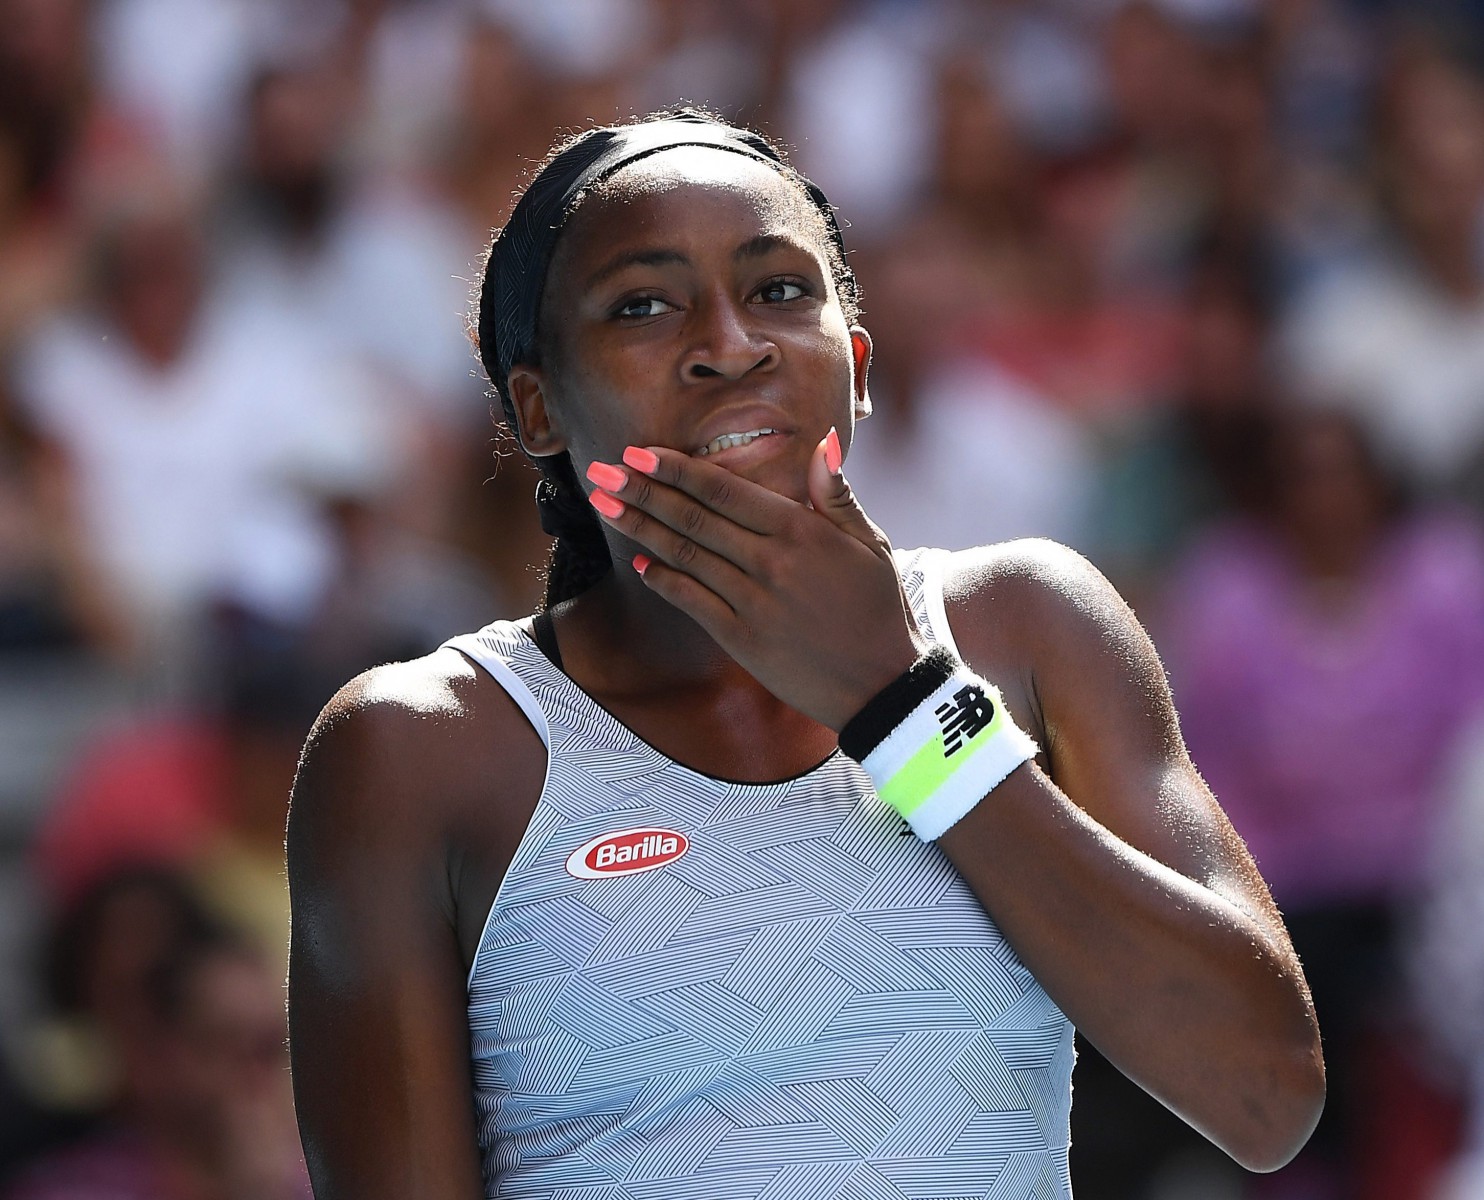 , Coco Gauff faces battle to qualify for 2020 Olympics thanks to age restrictions on WTA Tour limiting 15-year-old ace